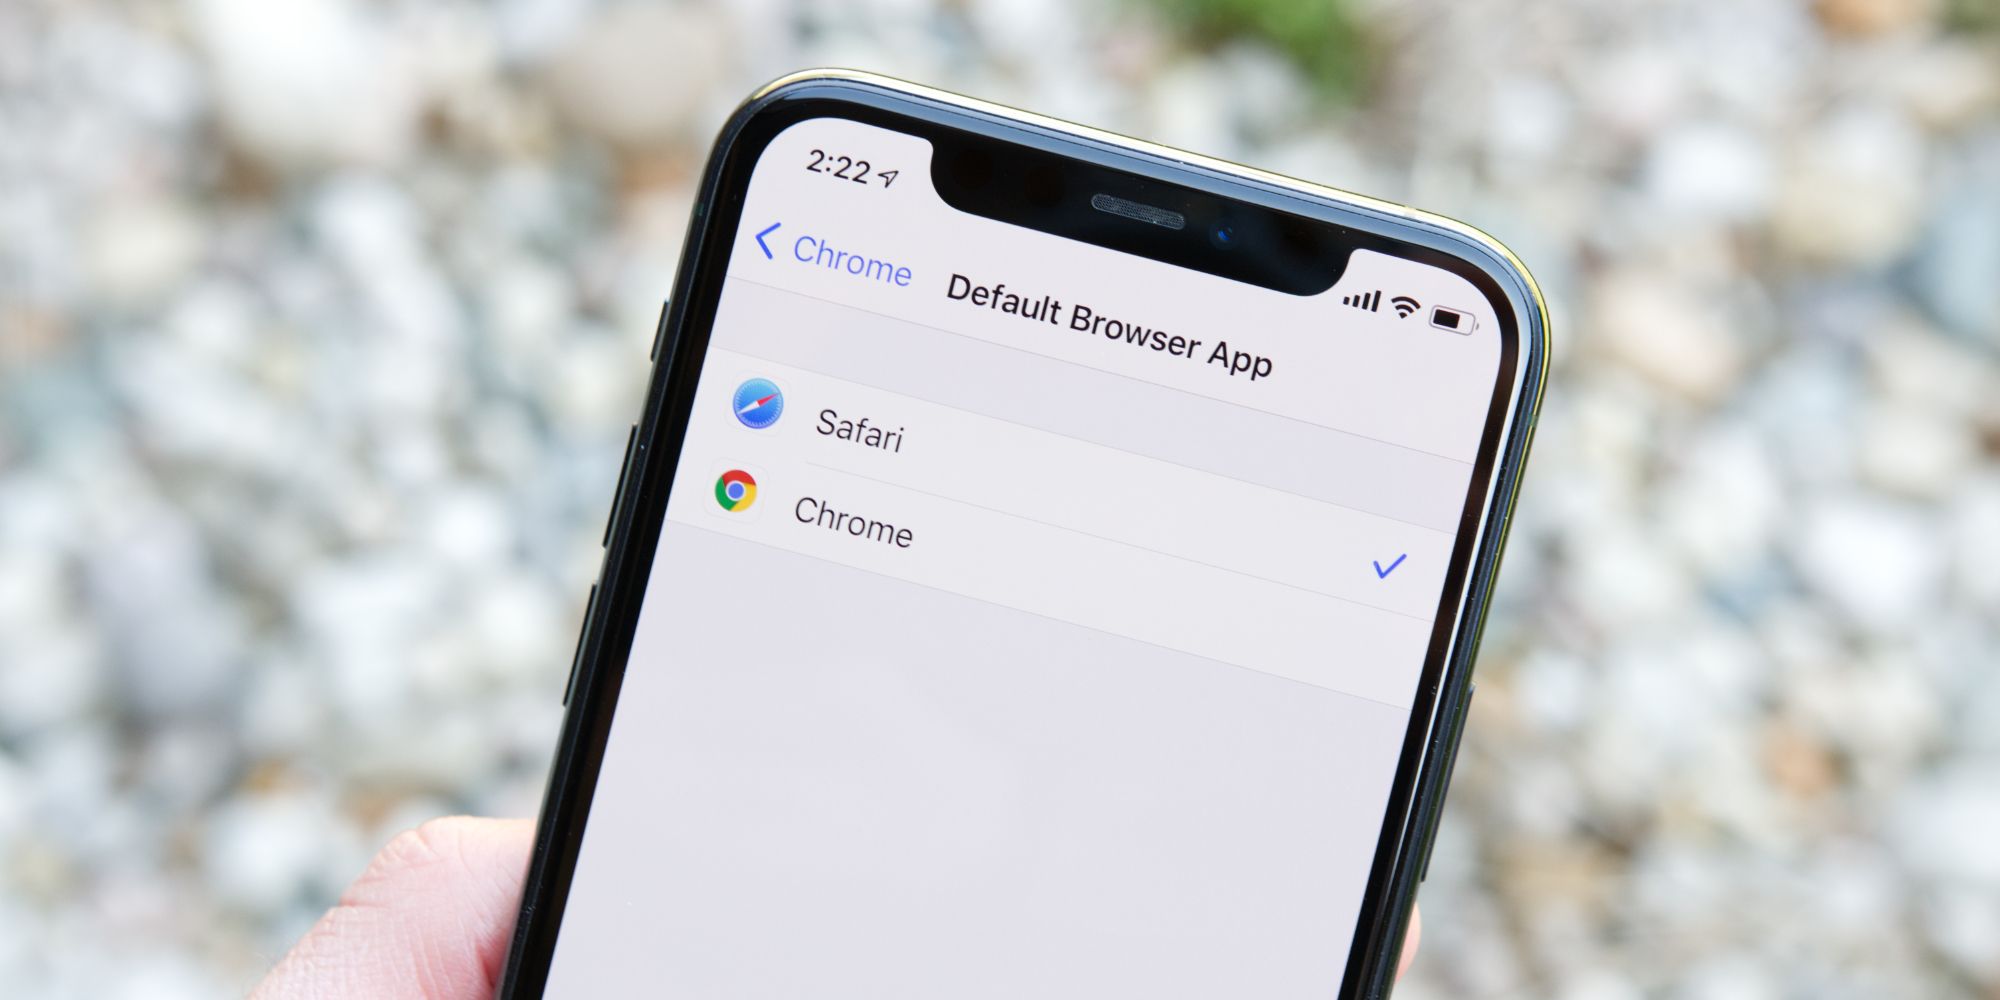 Setting a default browser app in iOS 14